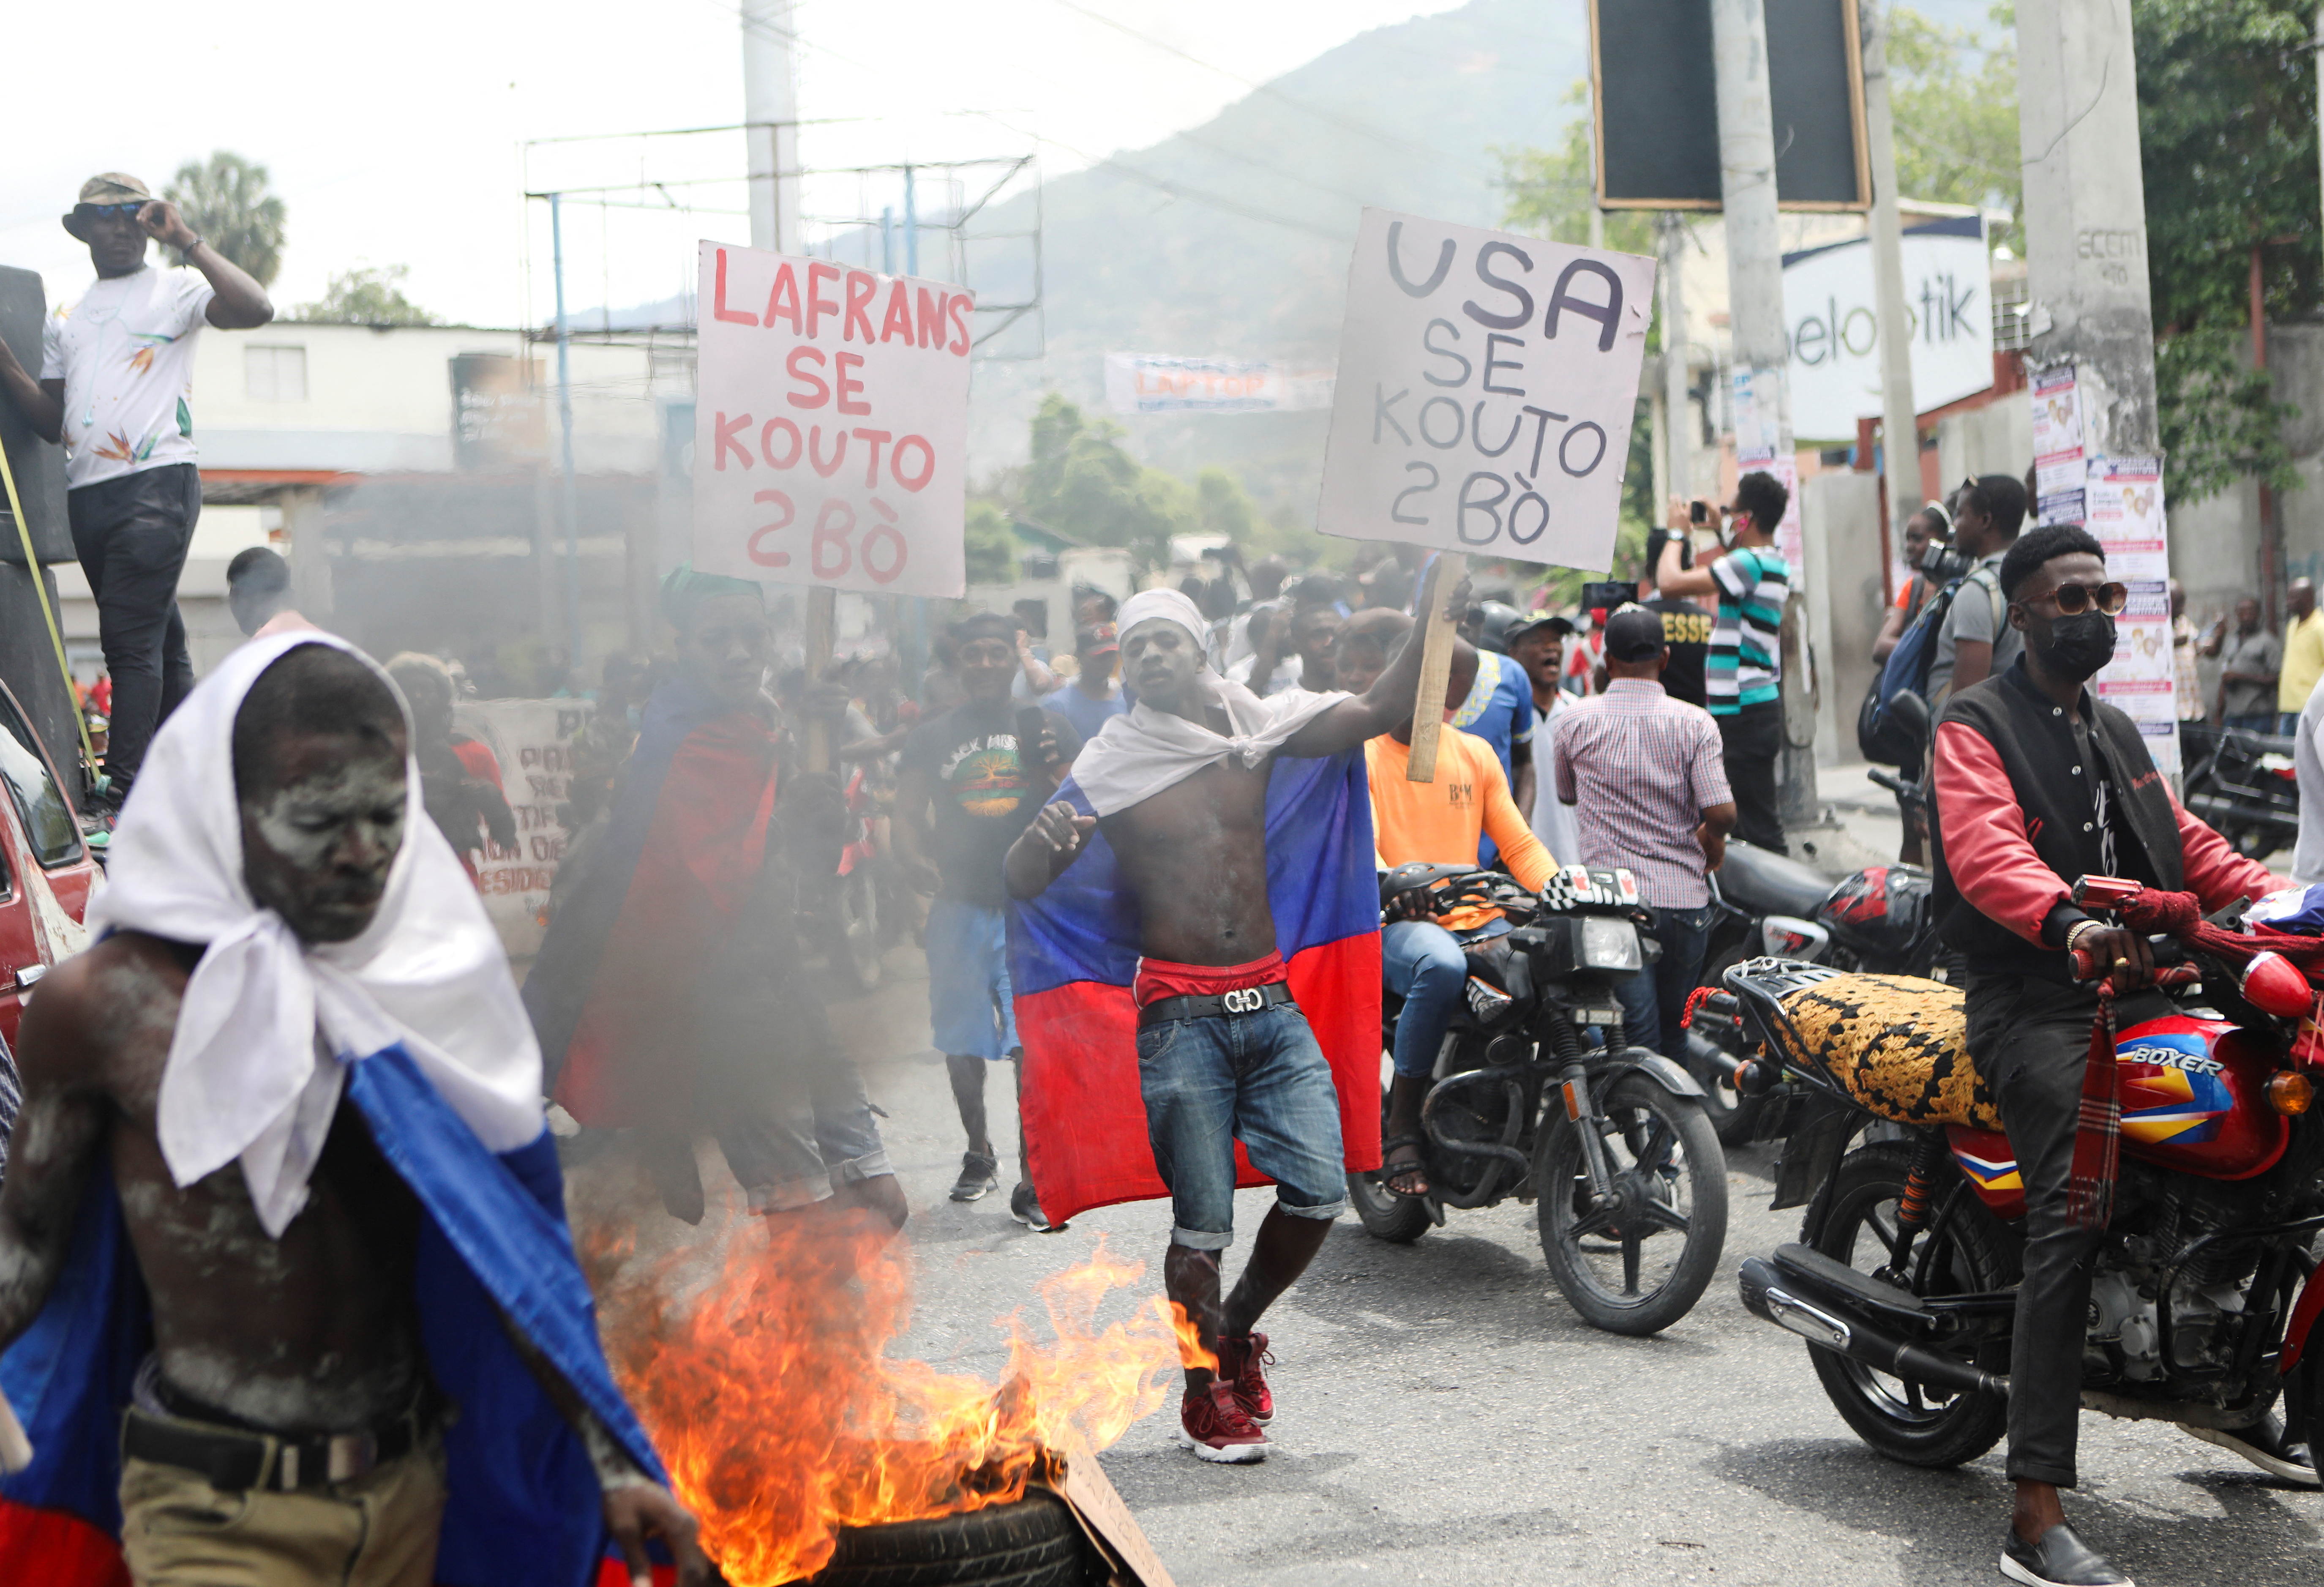 Demonstators march in protest against gang violence and kidnappings, in Port-au-Prince